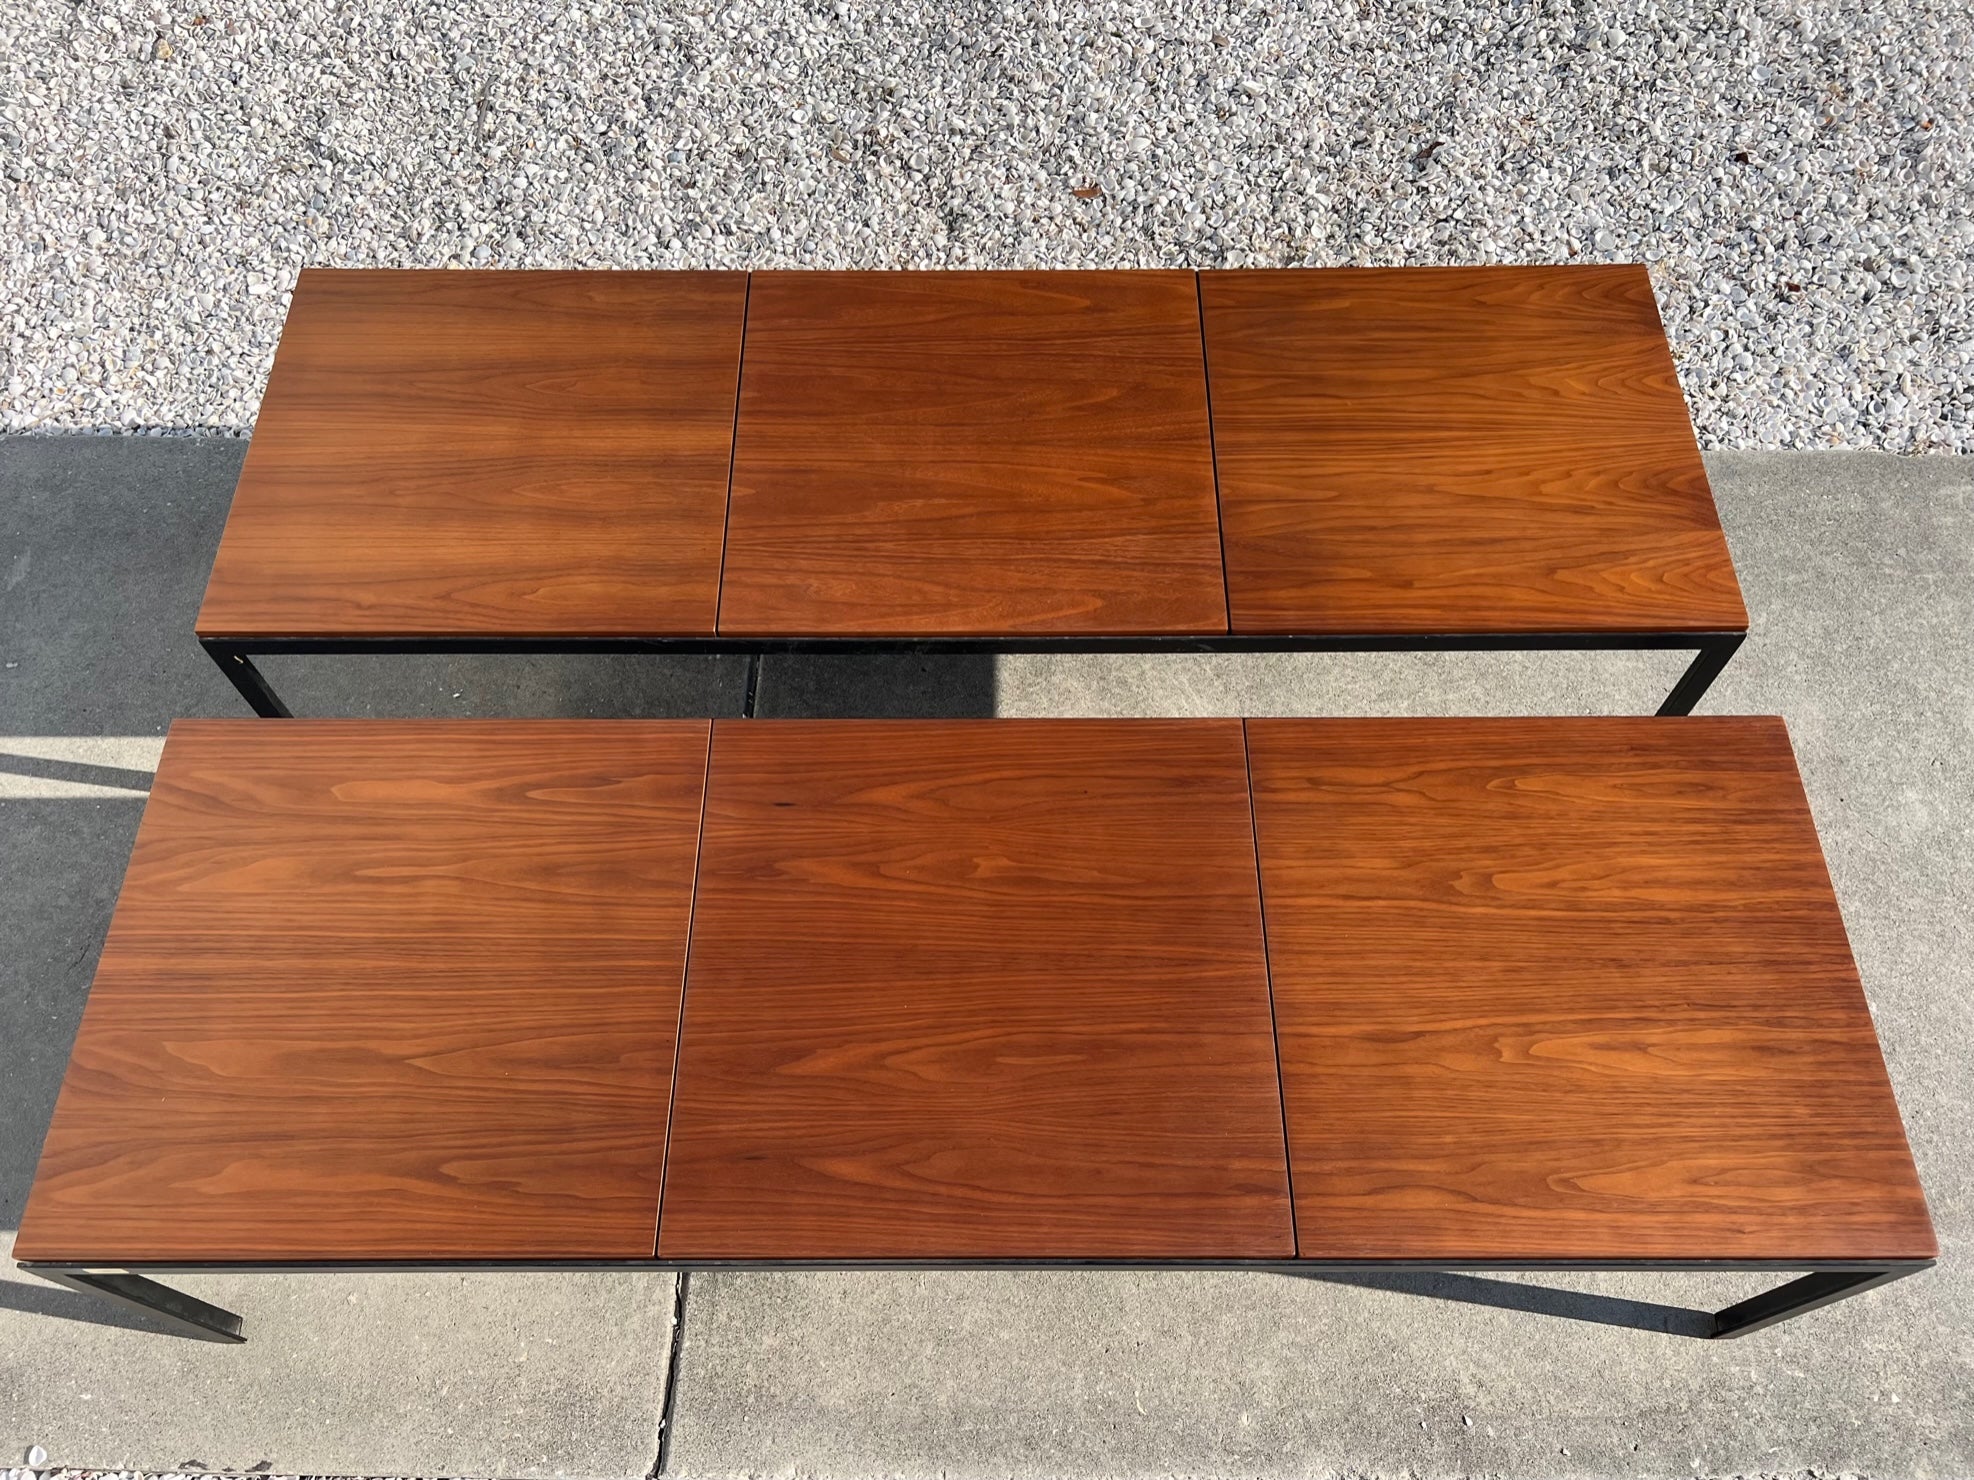 A pair of classic Florence Knoll for Knoll angle iron coffee tables or benches with bookmatched walnut tops.  Beautiful veneer, quality early Knoll production. Very practical and timeless, minimalist design. Heavy angled T iron frames-each one